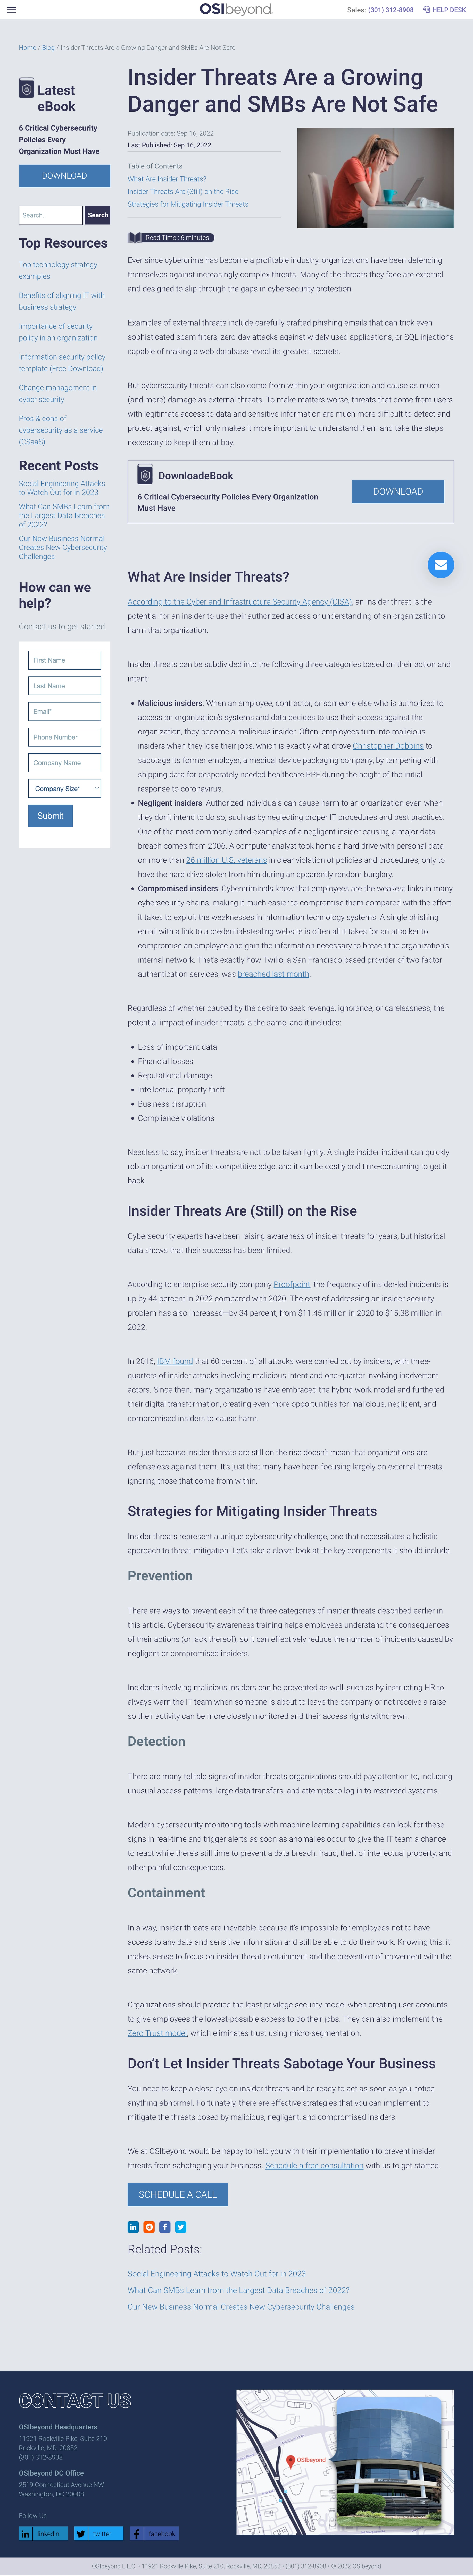 Insider Threats Are a Growing Danger and SMBs Are Not Safe
